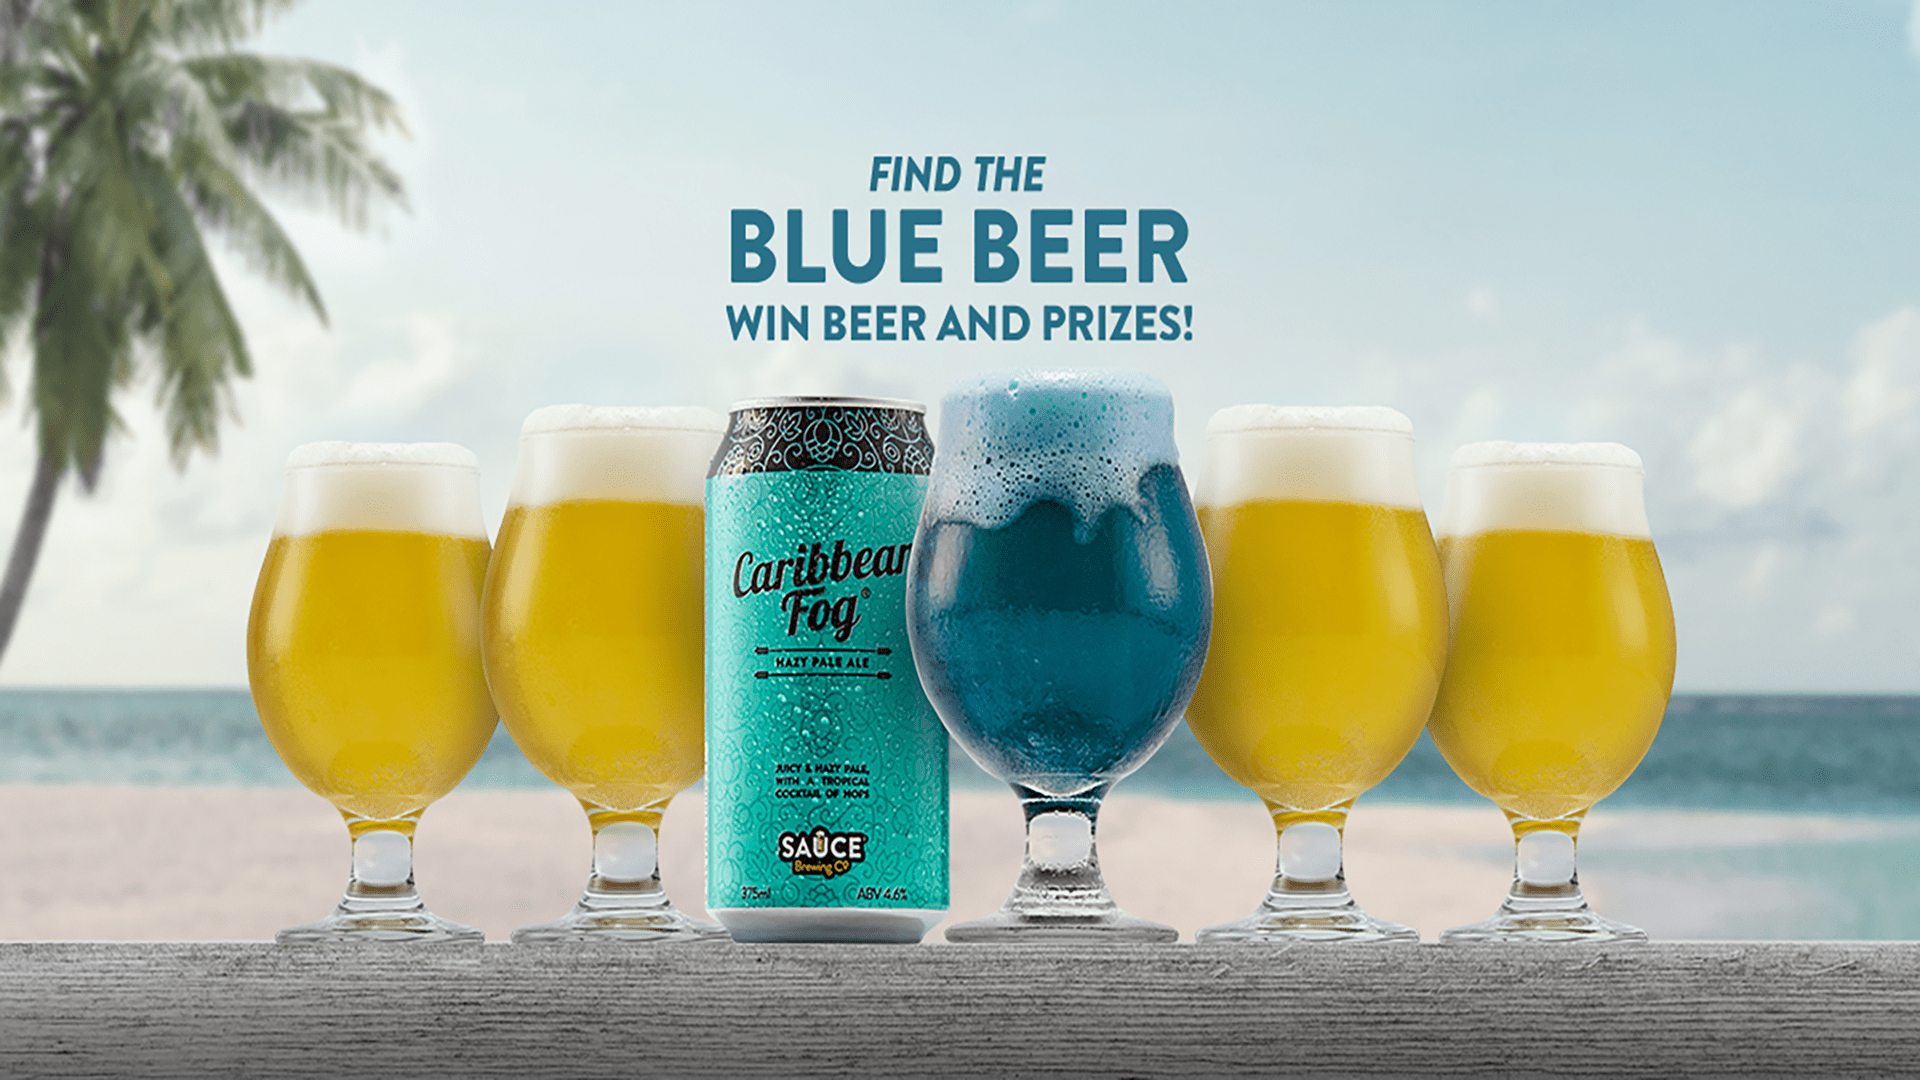 blue beer campaign sauce brewing co